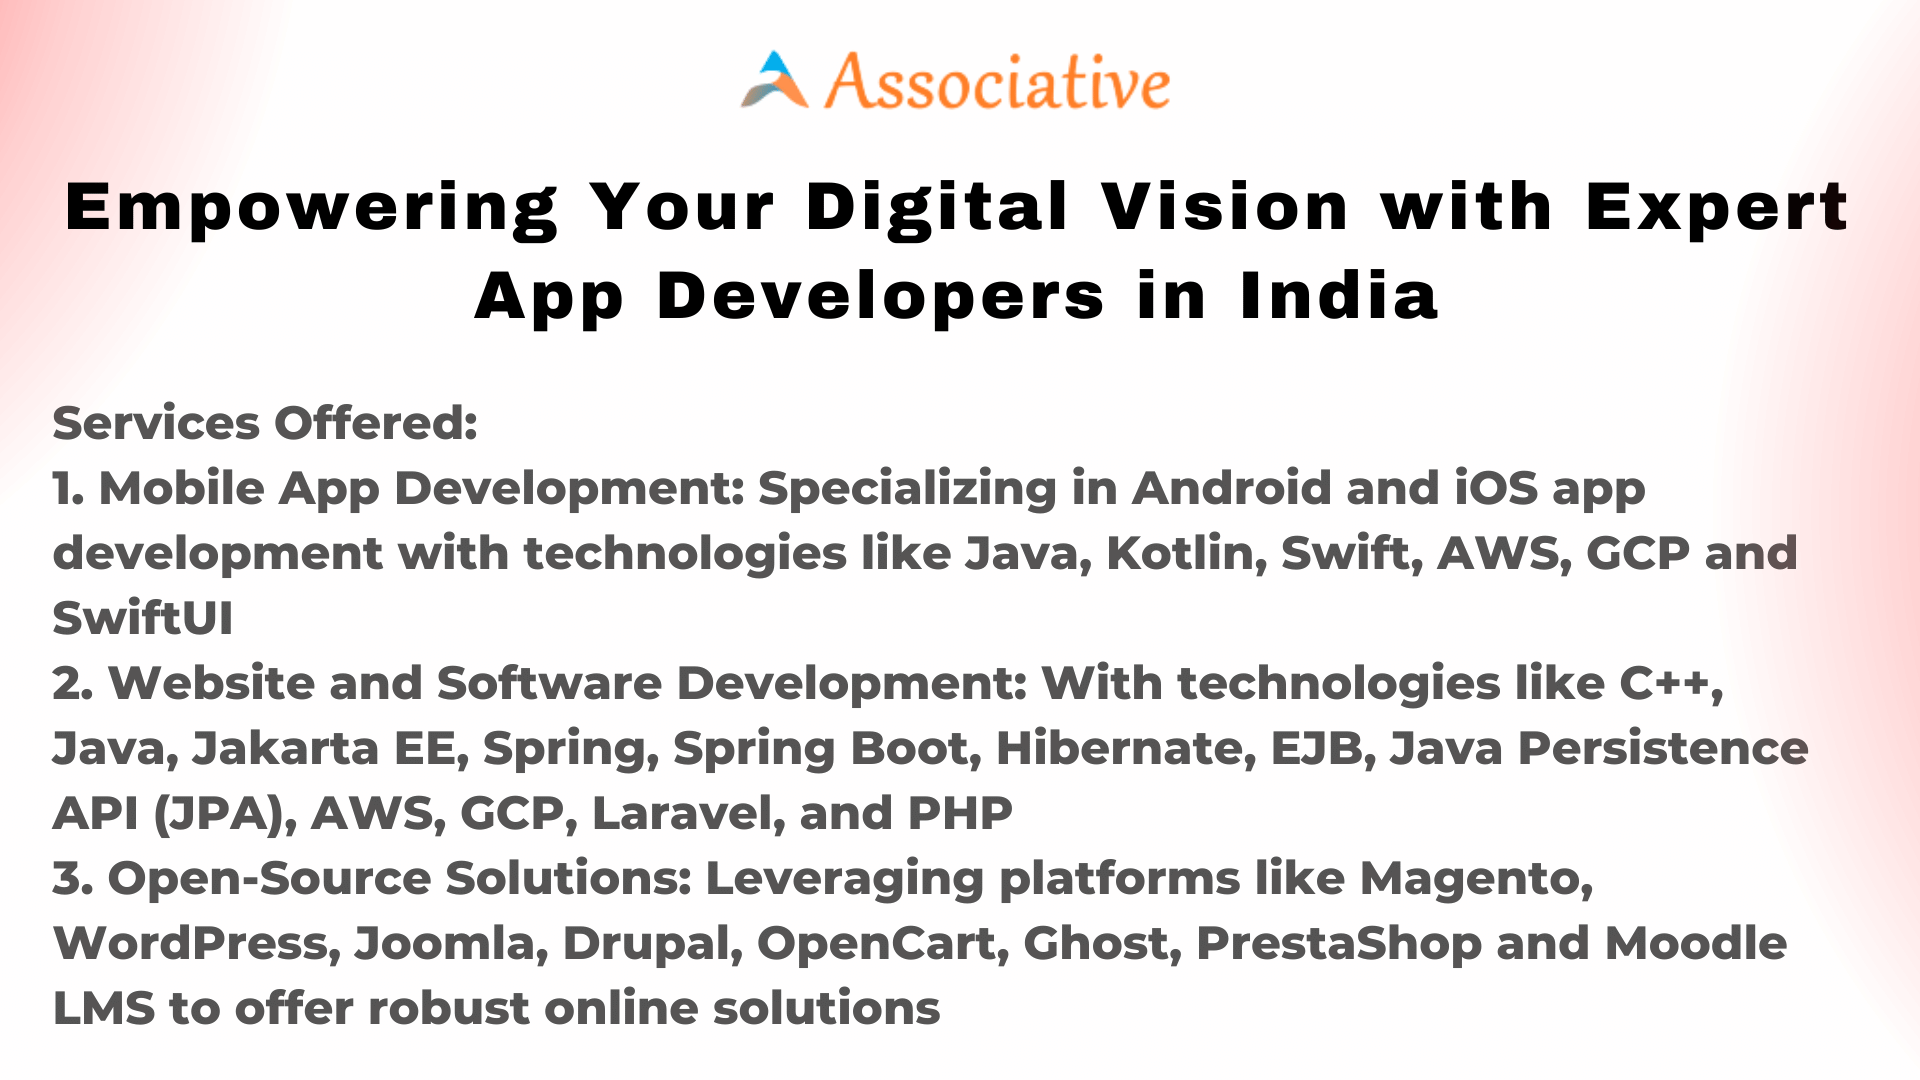 Empowering Your Digital Vision with Expert App Developers in India